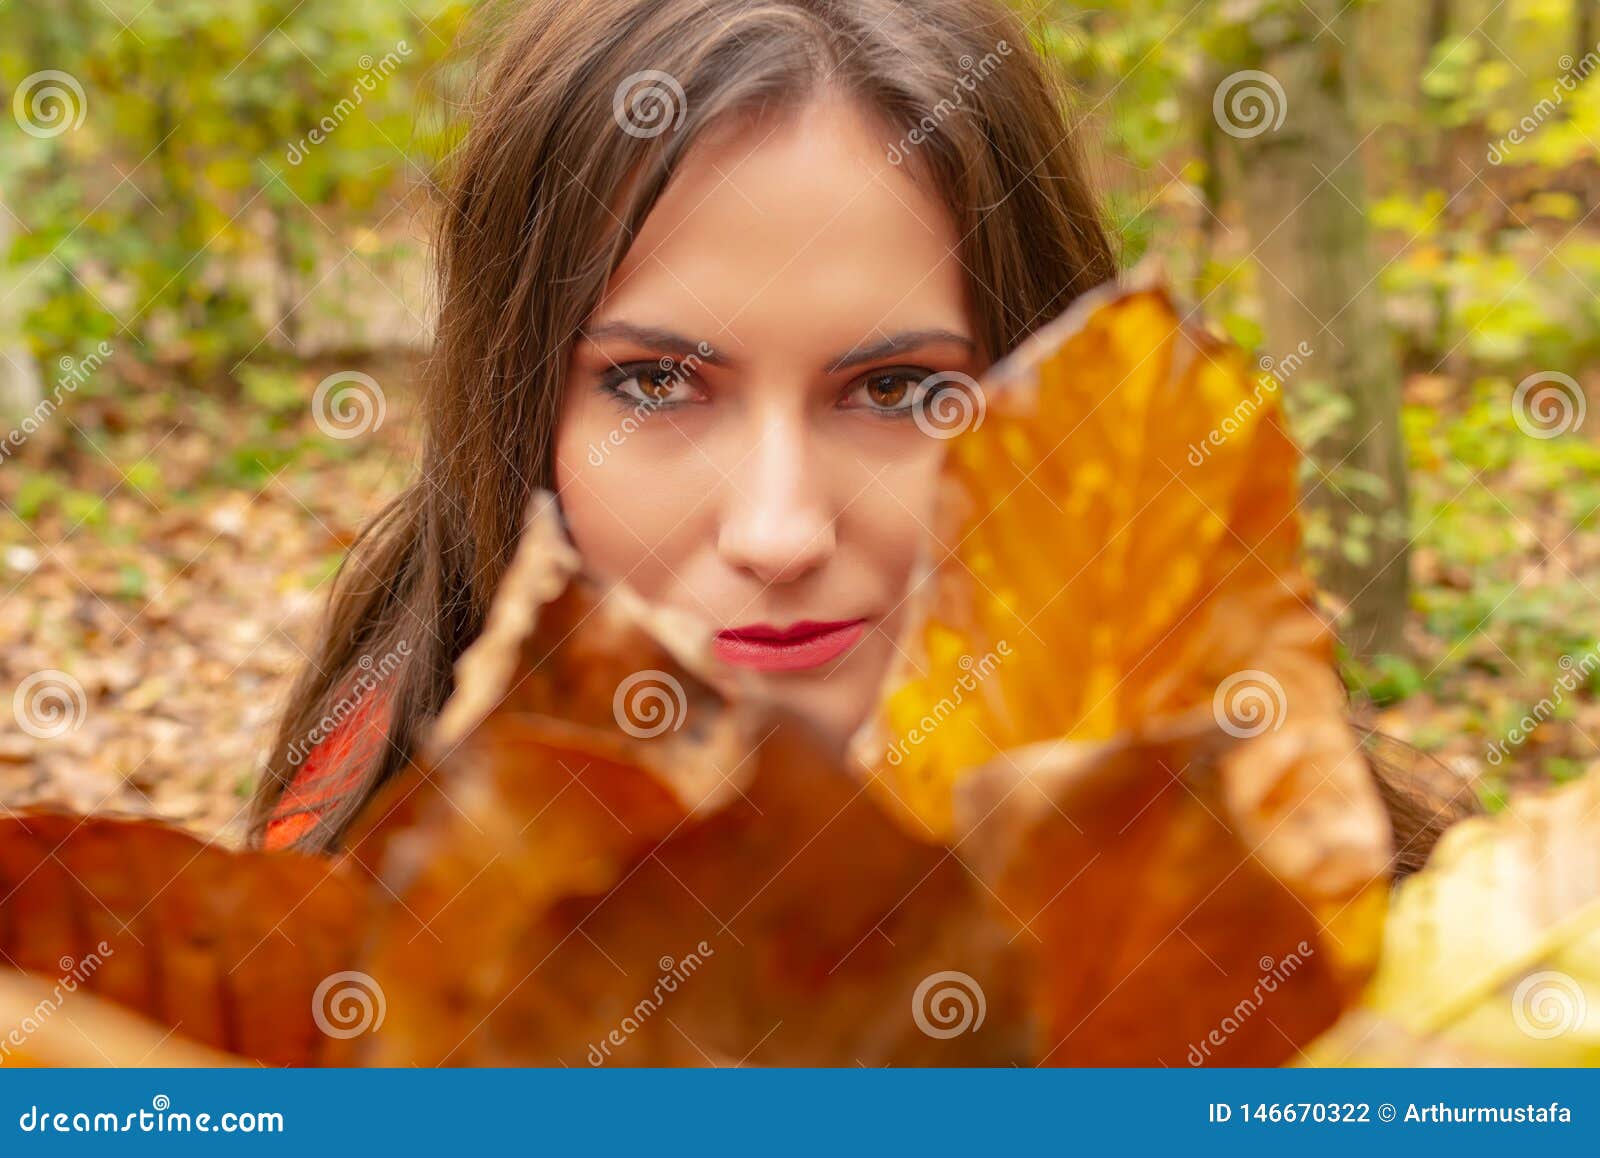 Gorgeous Young Woman Outdoors, in a Park Autumn Scenery, Holding Yellow ...